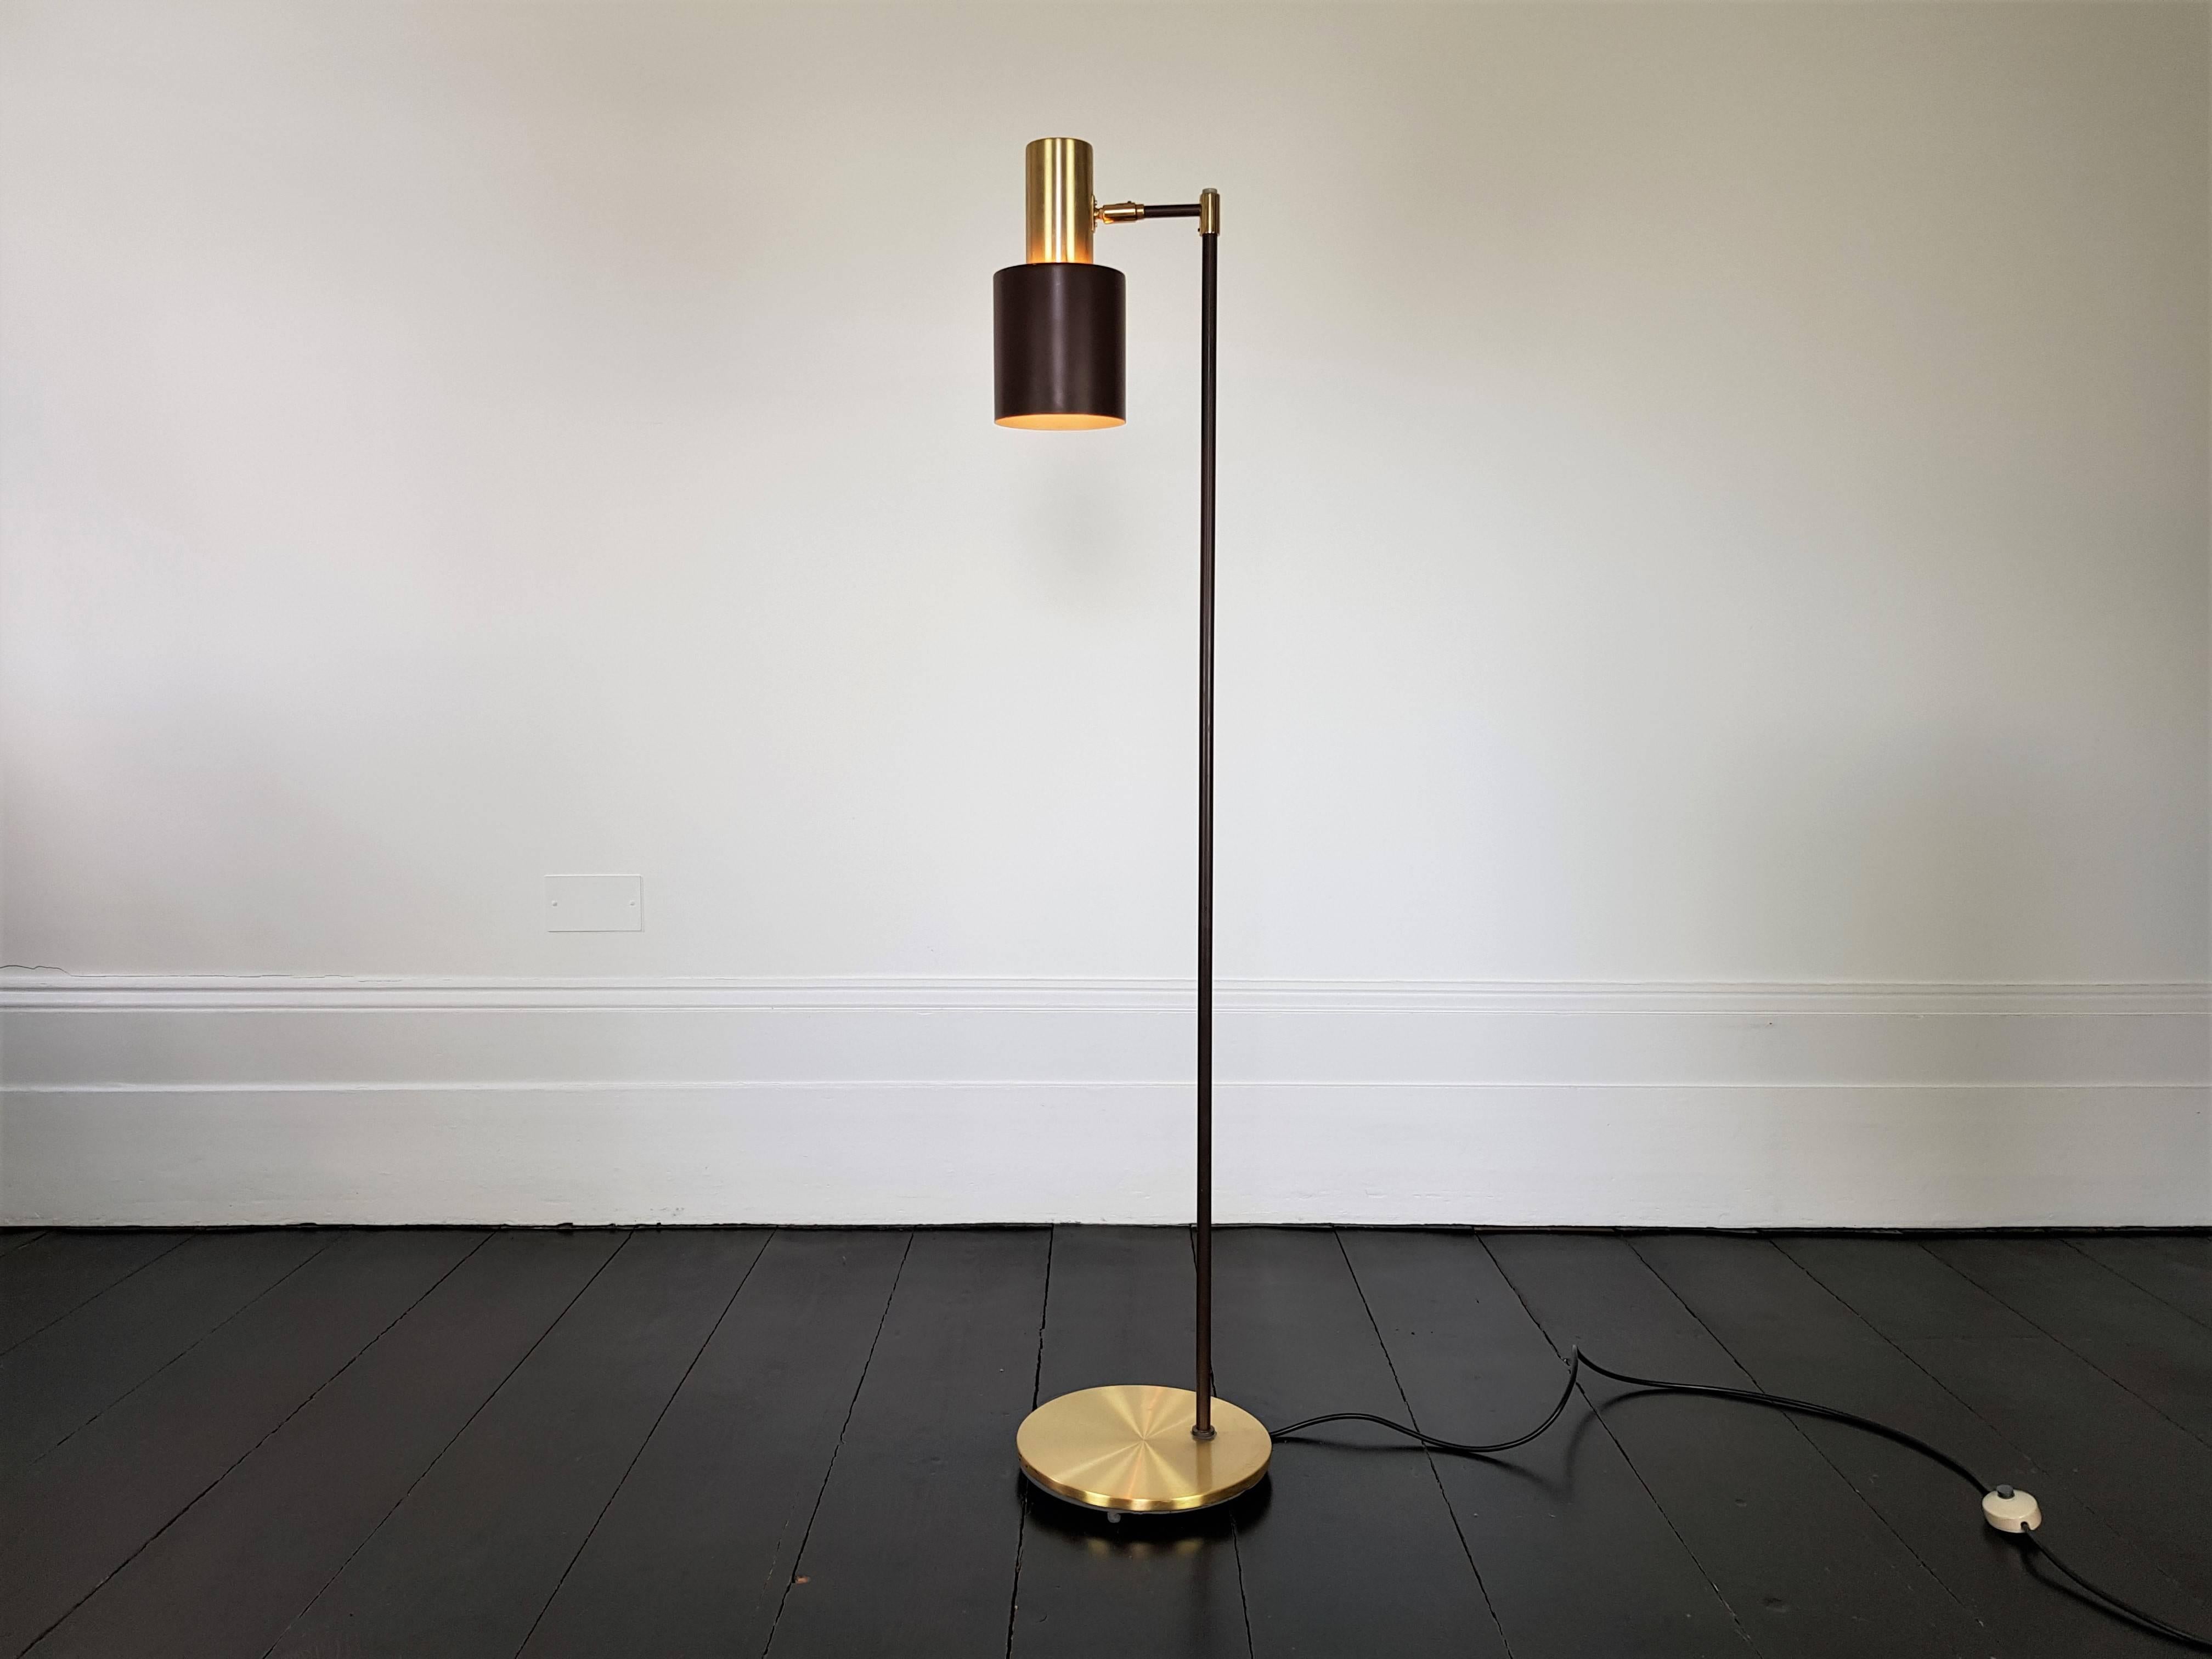 A Jo Hammerborg brass 'Studio' floor lamp for Fog & Mørup. Designed by Jo Hammerborg for Fog & Mørup and released in the 1960s.

In 1957 Hammerborg became head of design at Fog & Mørup. His incumbency in this role was to prove the most successful